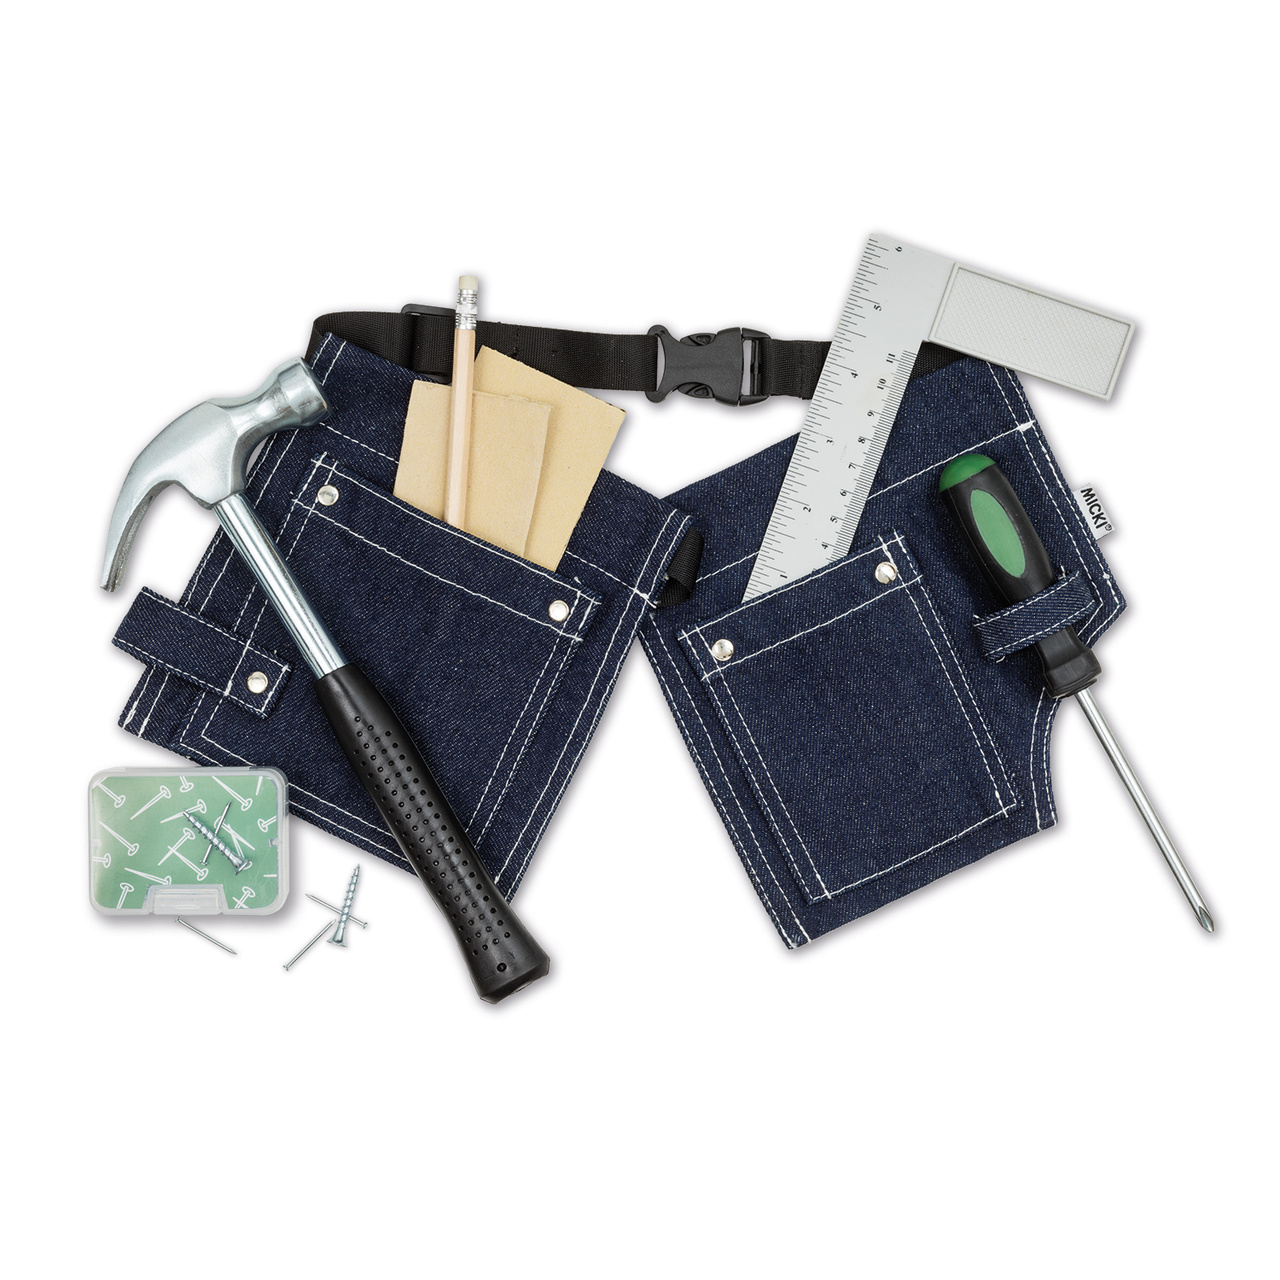 Kids’ costumes micki tool belt with real tools